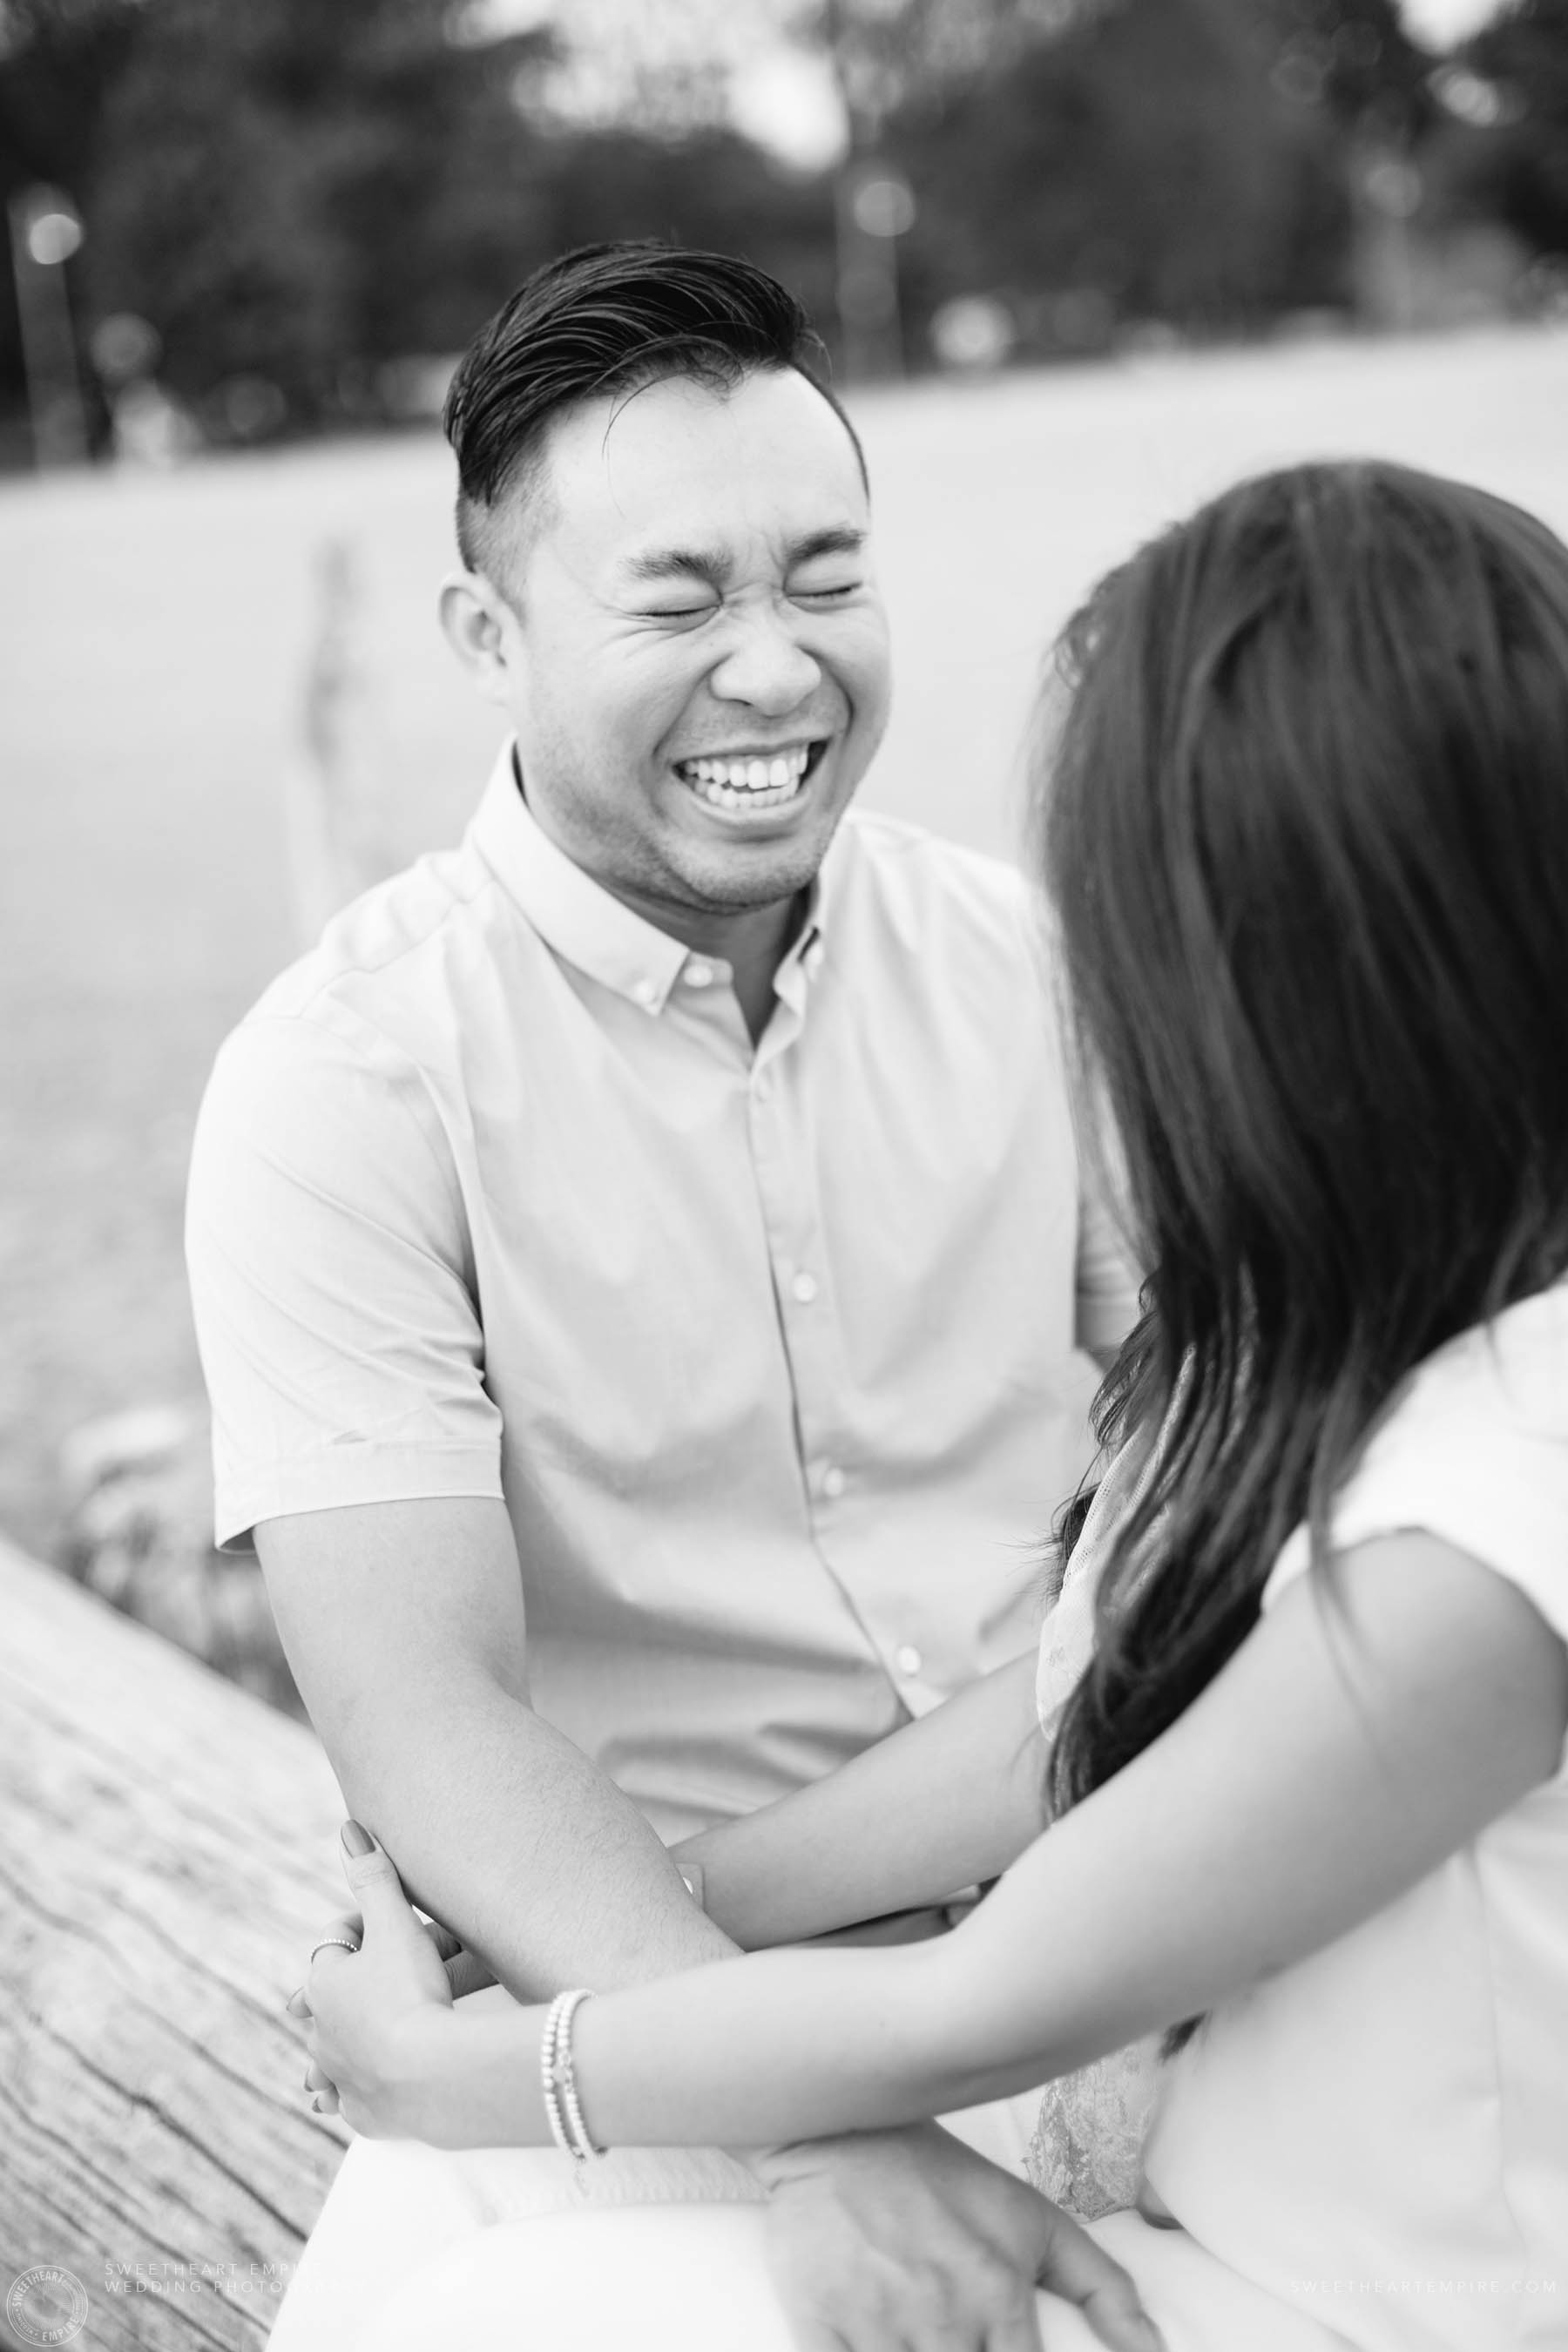 Groom to be laughing, Engagement Photos at Kew Gardens